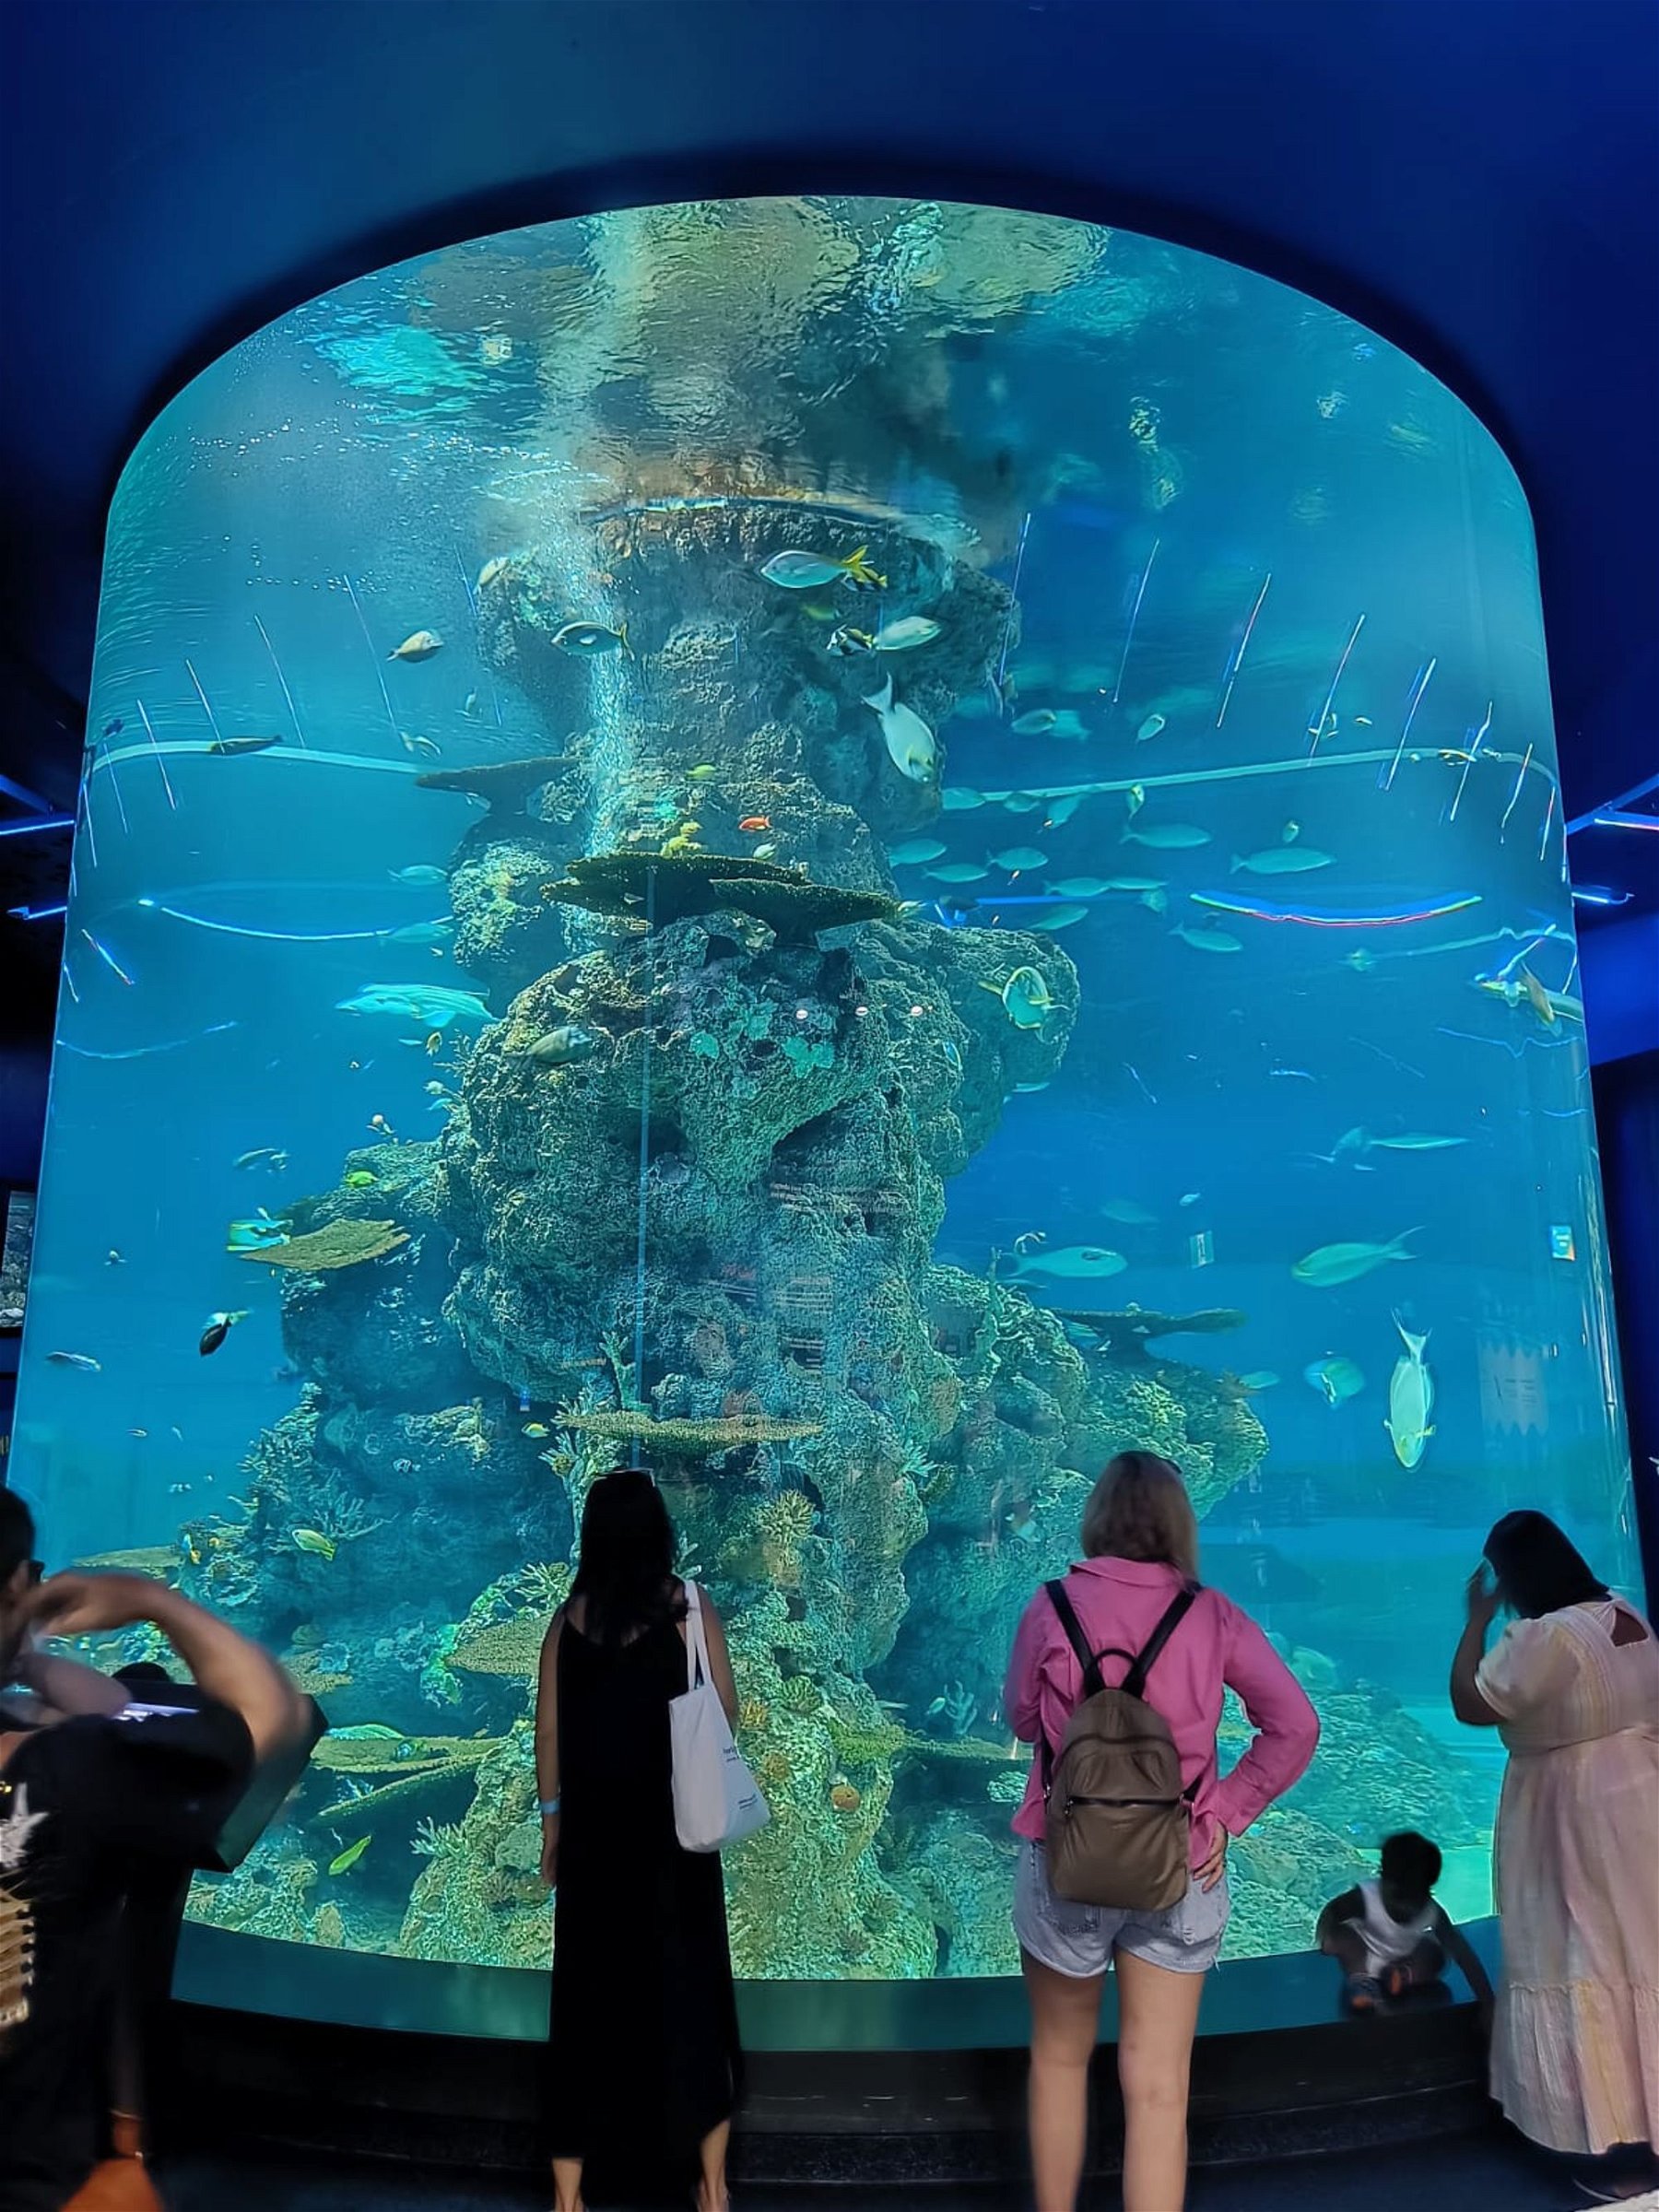 One of the best aquariums I’ve been in!